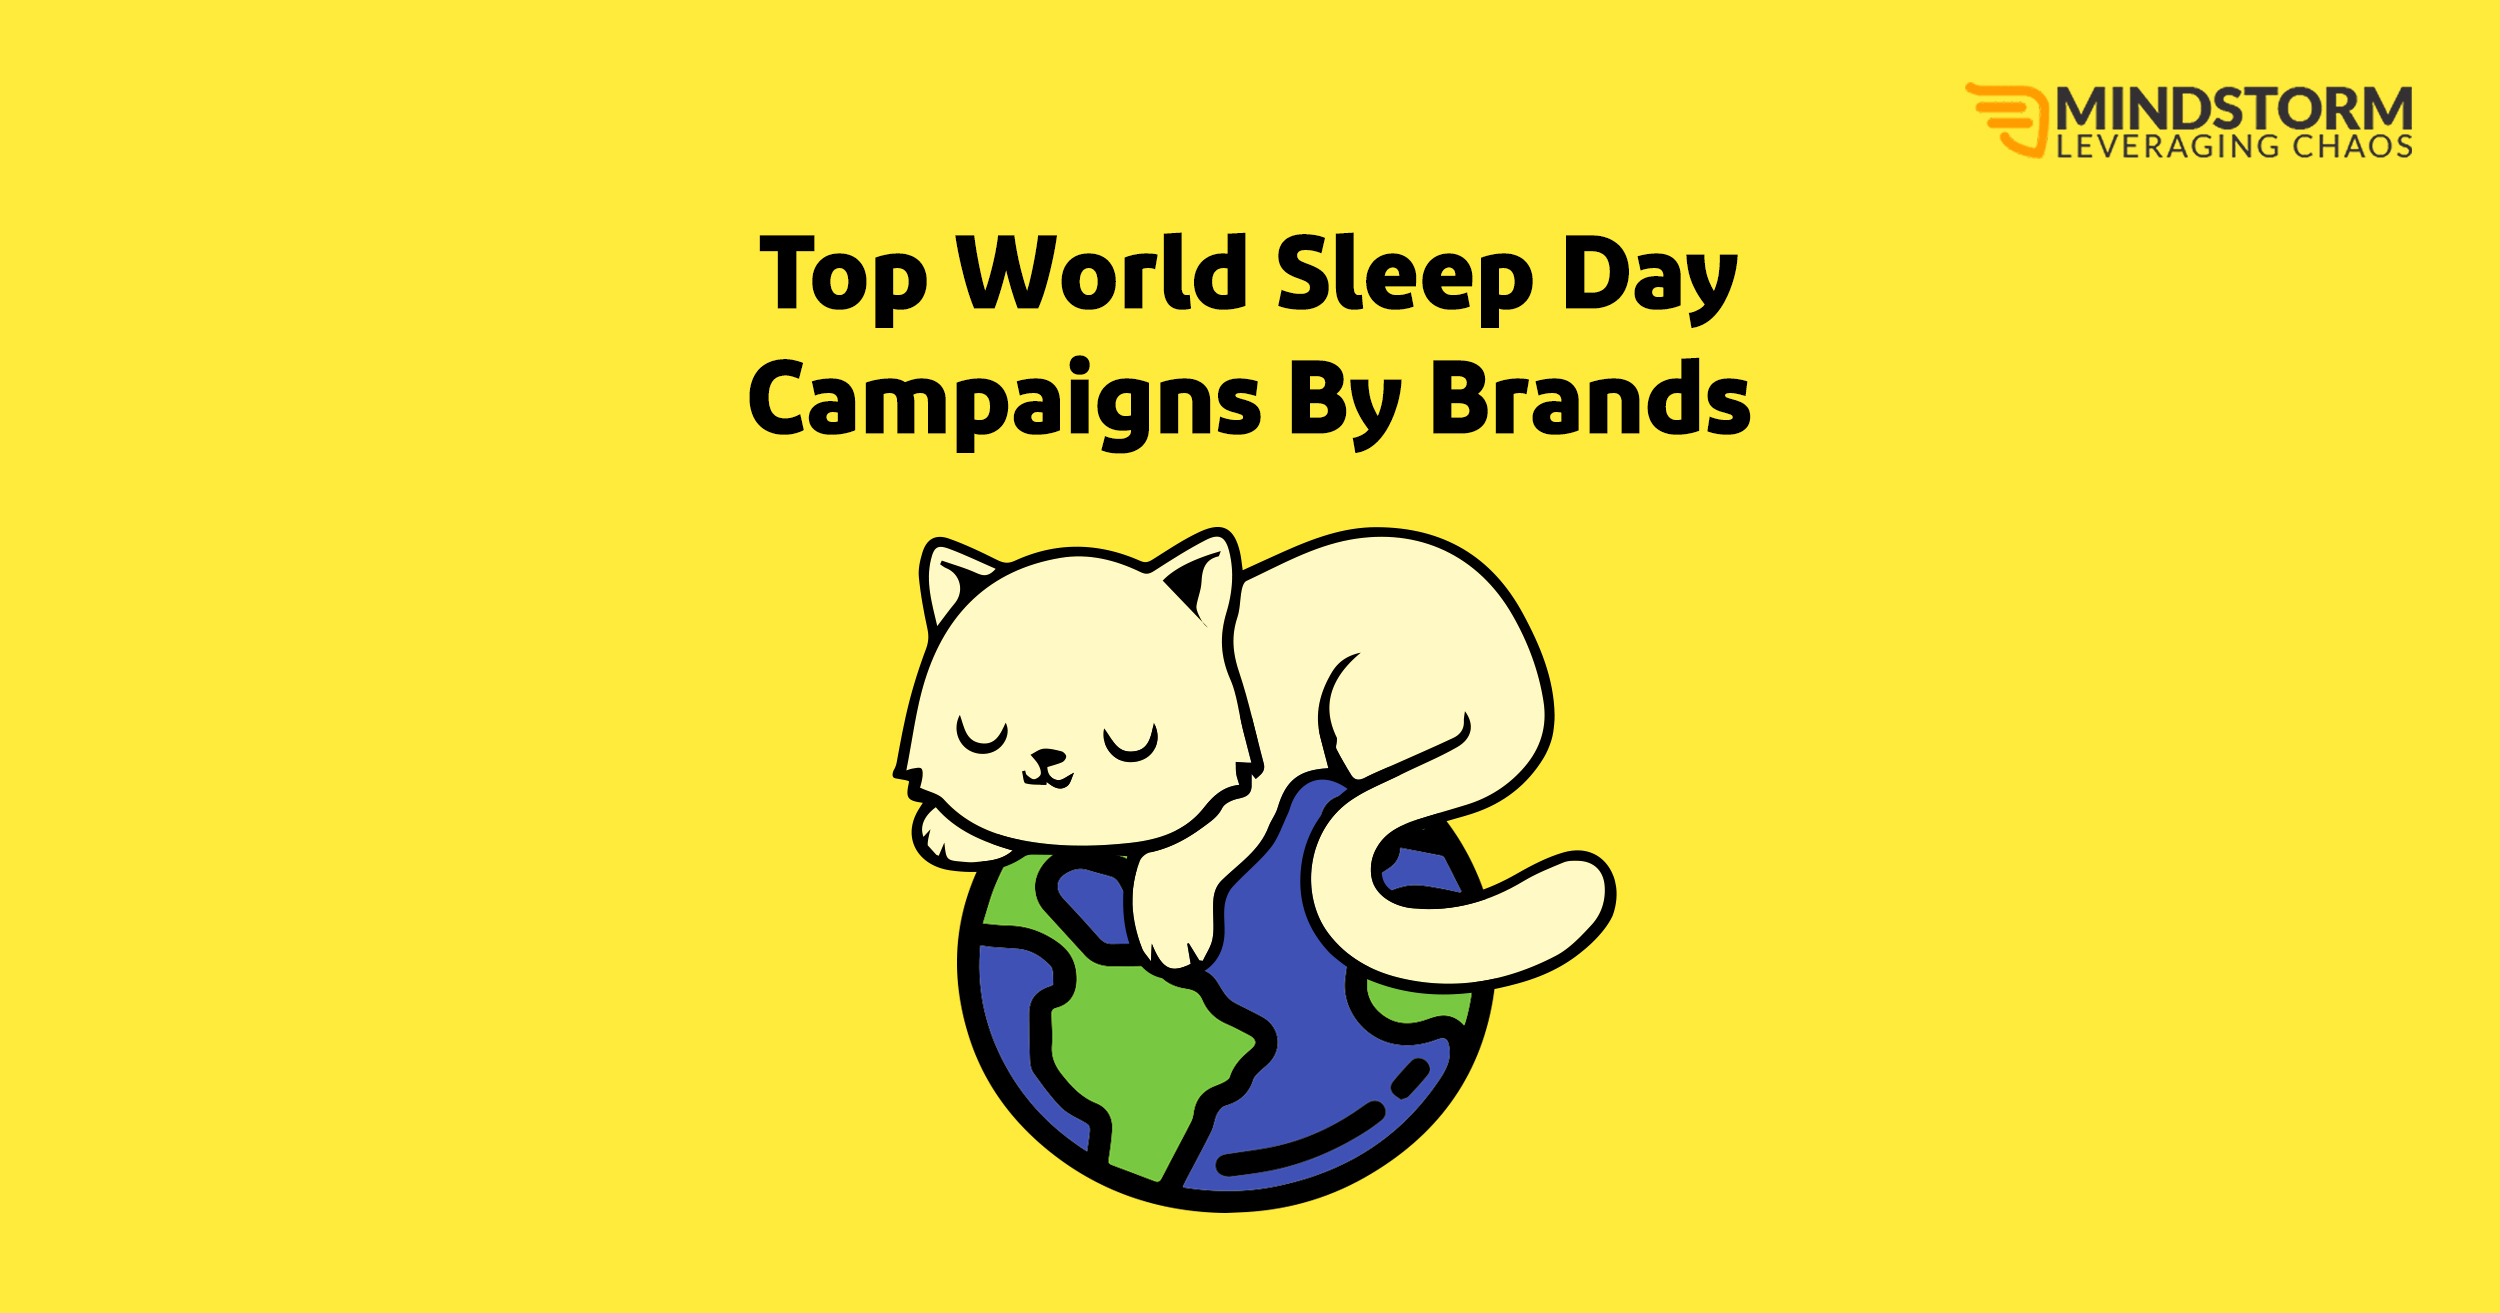 Top World Sleep Day Campaigns by Brands